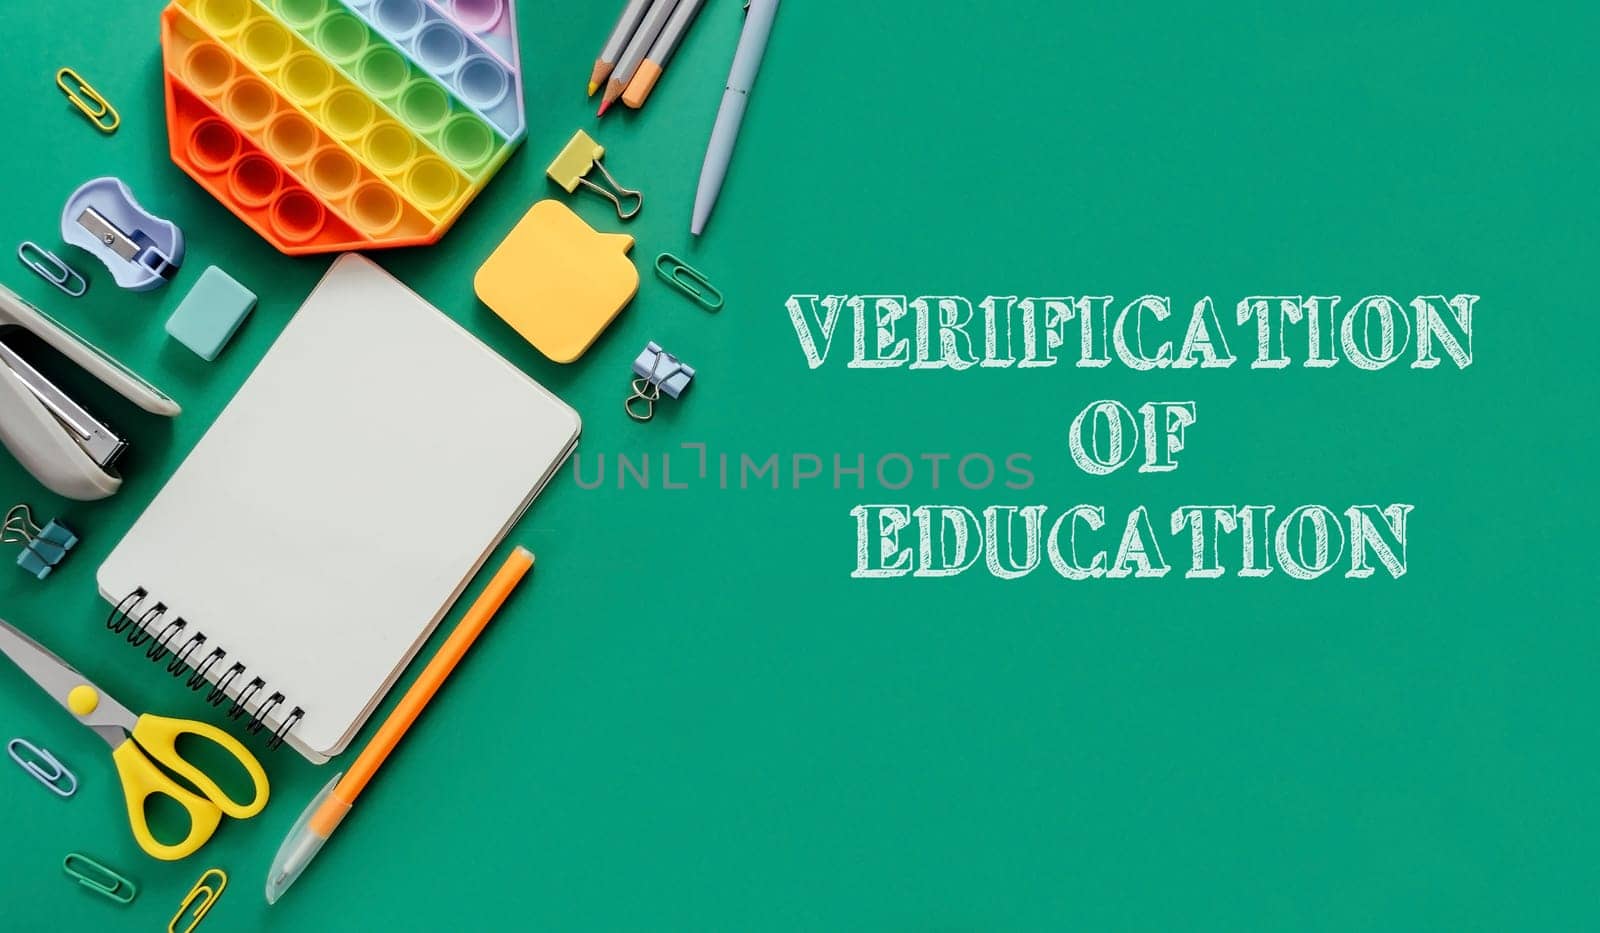 A green background with a notebook, pens, scissors, and a rubber band. The words Verification of Education are written on the background